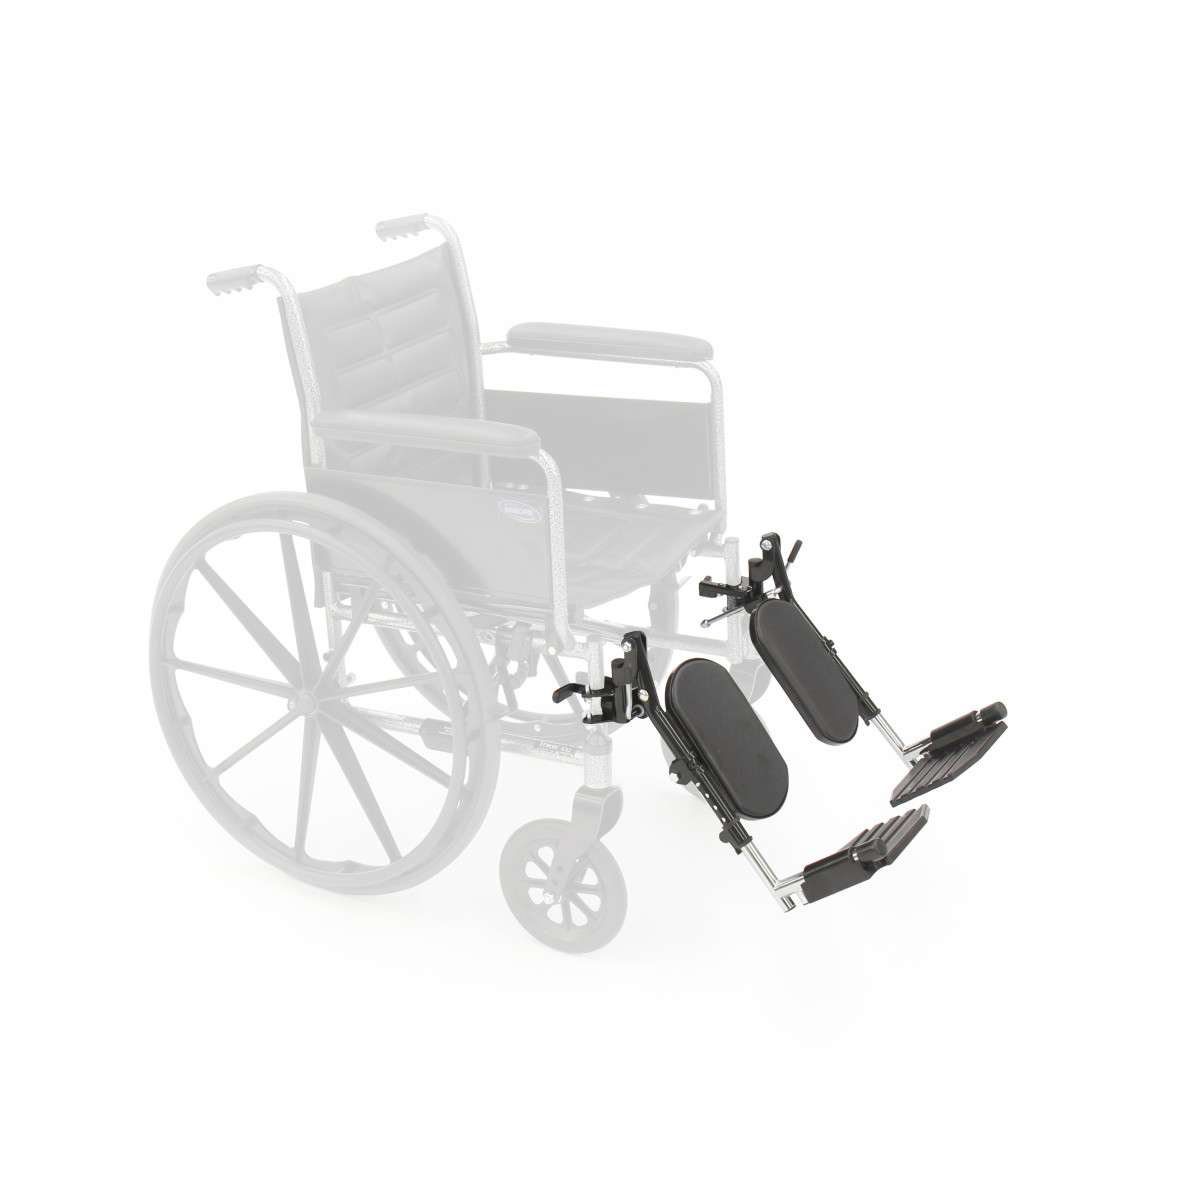 Invacare Swing-Away Economy Elevating Legrests, Composite Footplates (Non-Padded Calf Pads)